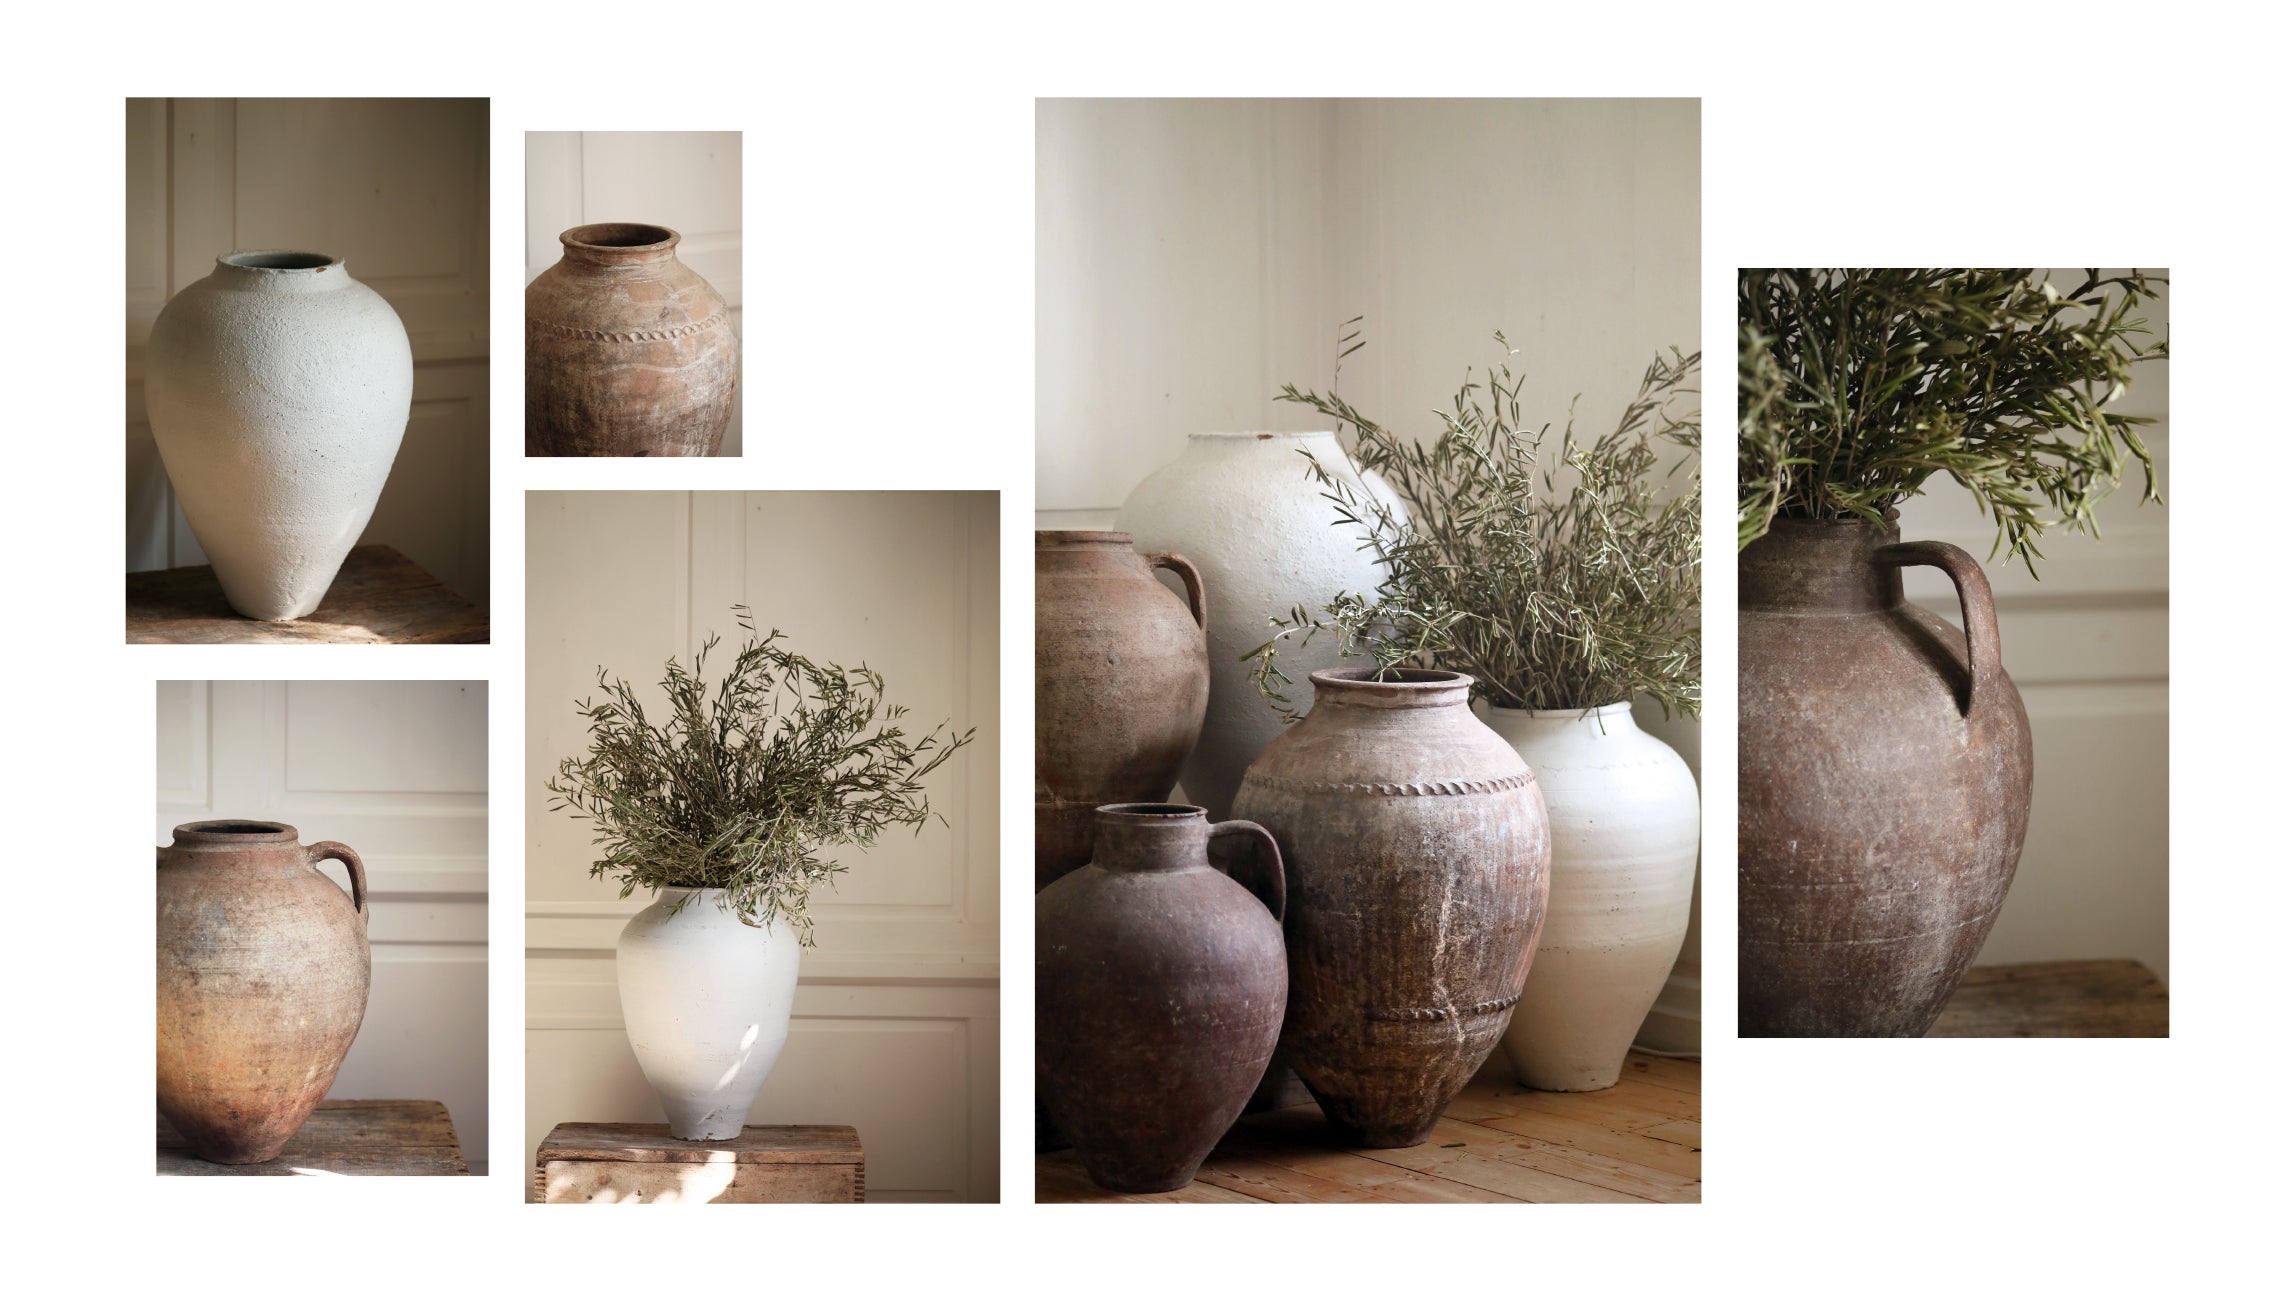 Statement urns + terracotta olive pots for wedding hire + rent for photoshoot props